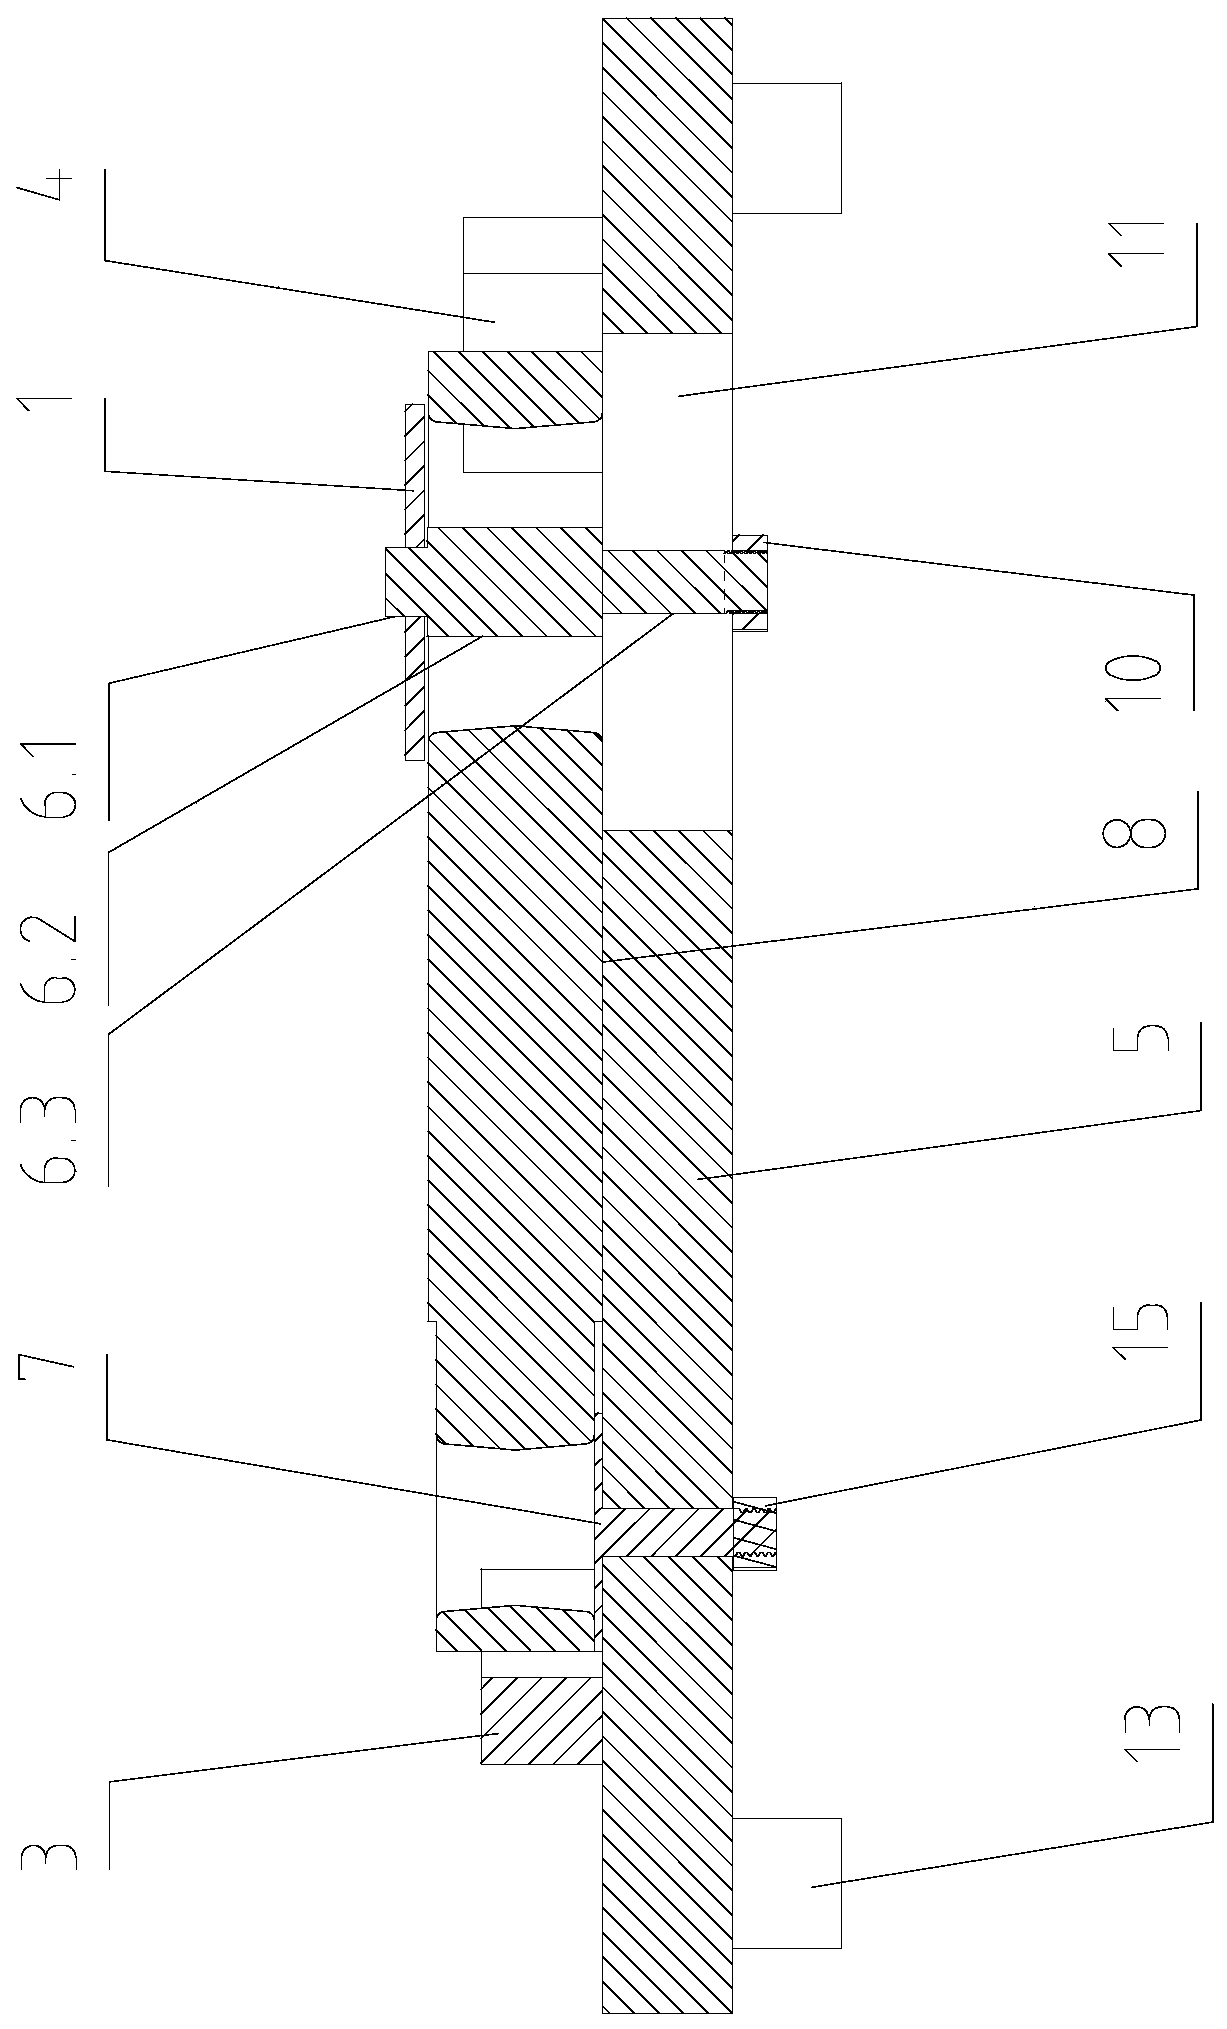 Connecting rod blank center distance detection device